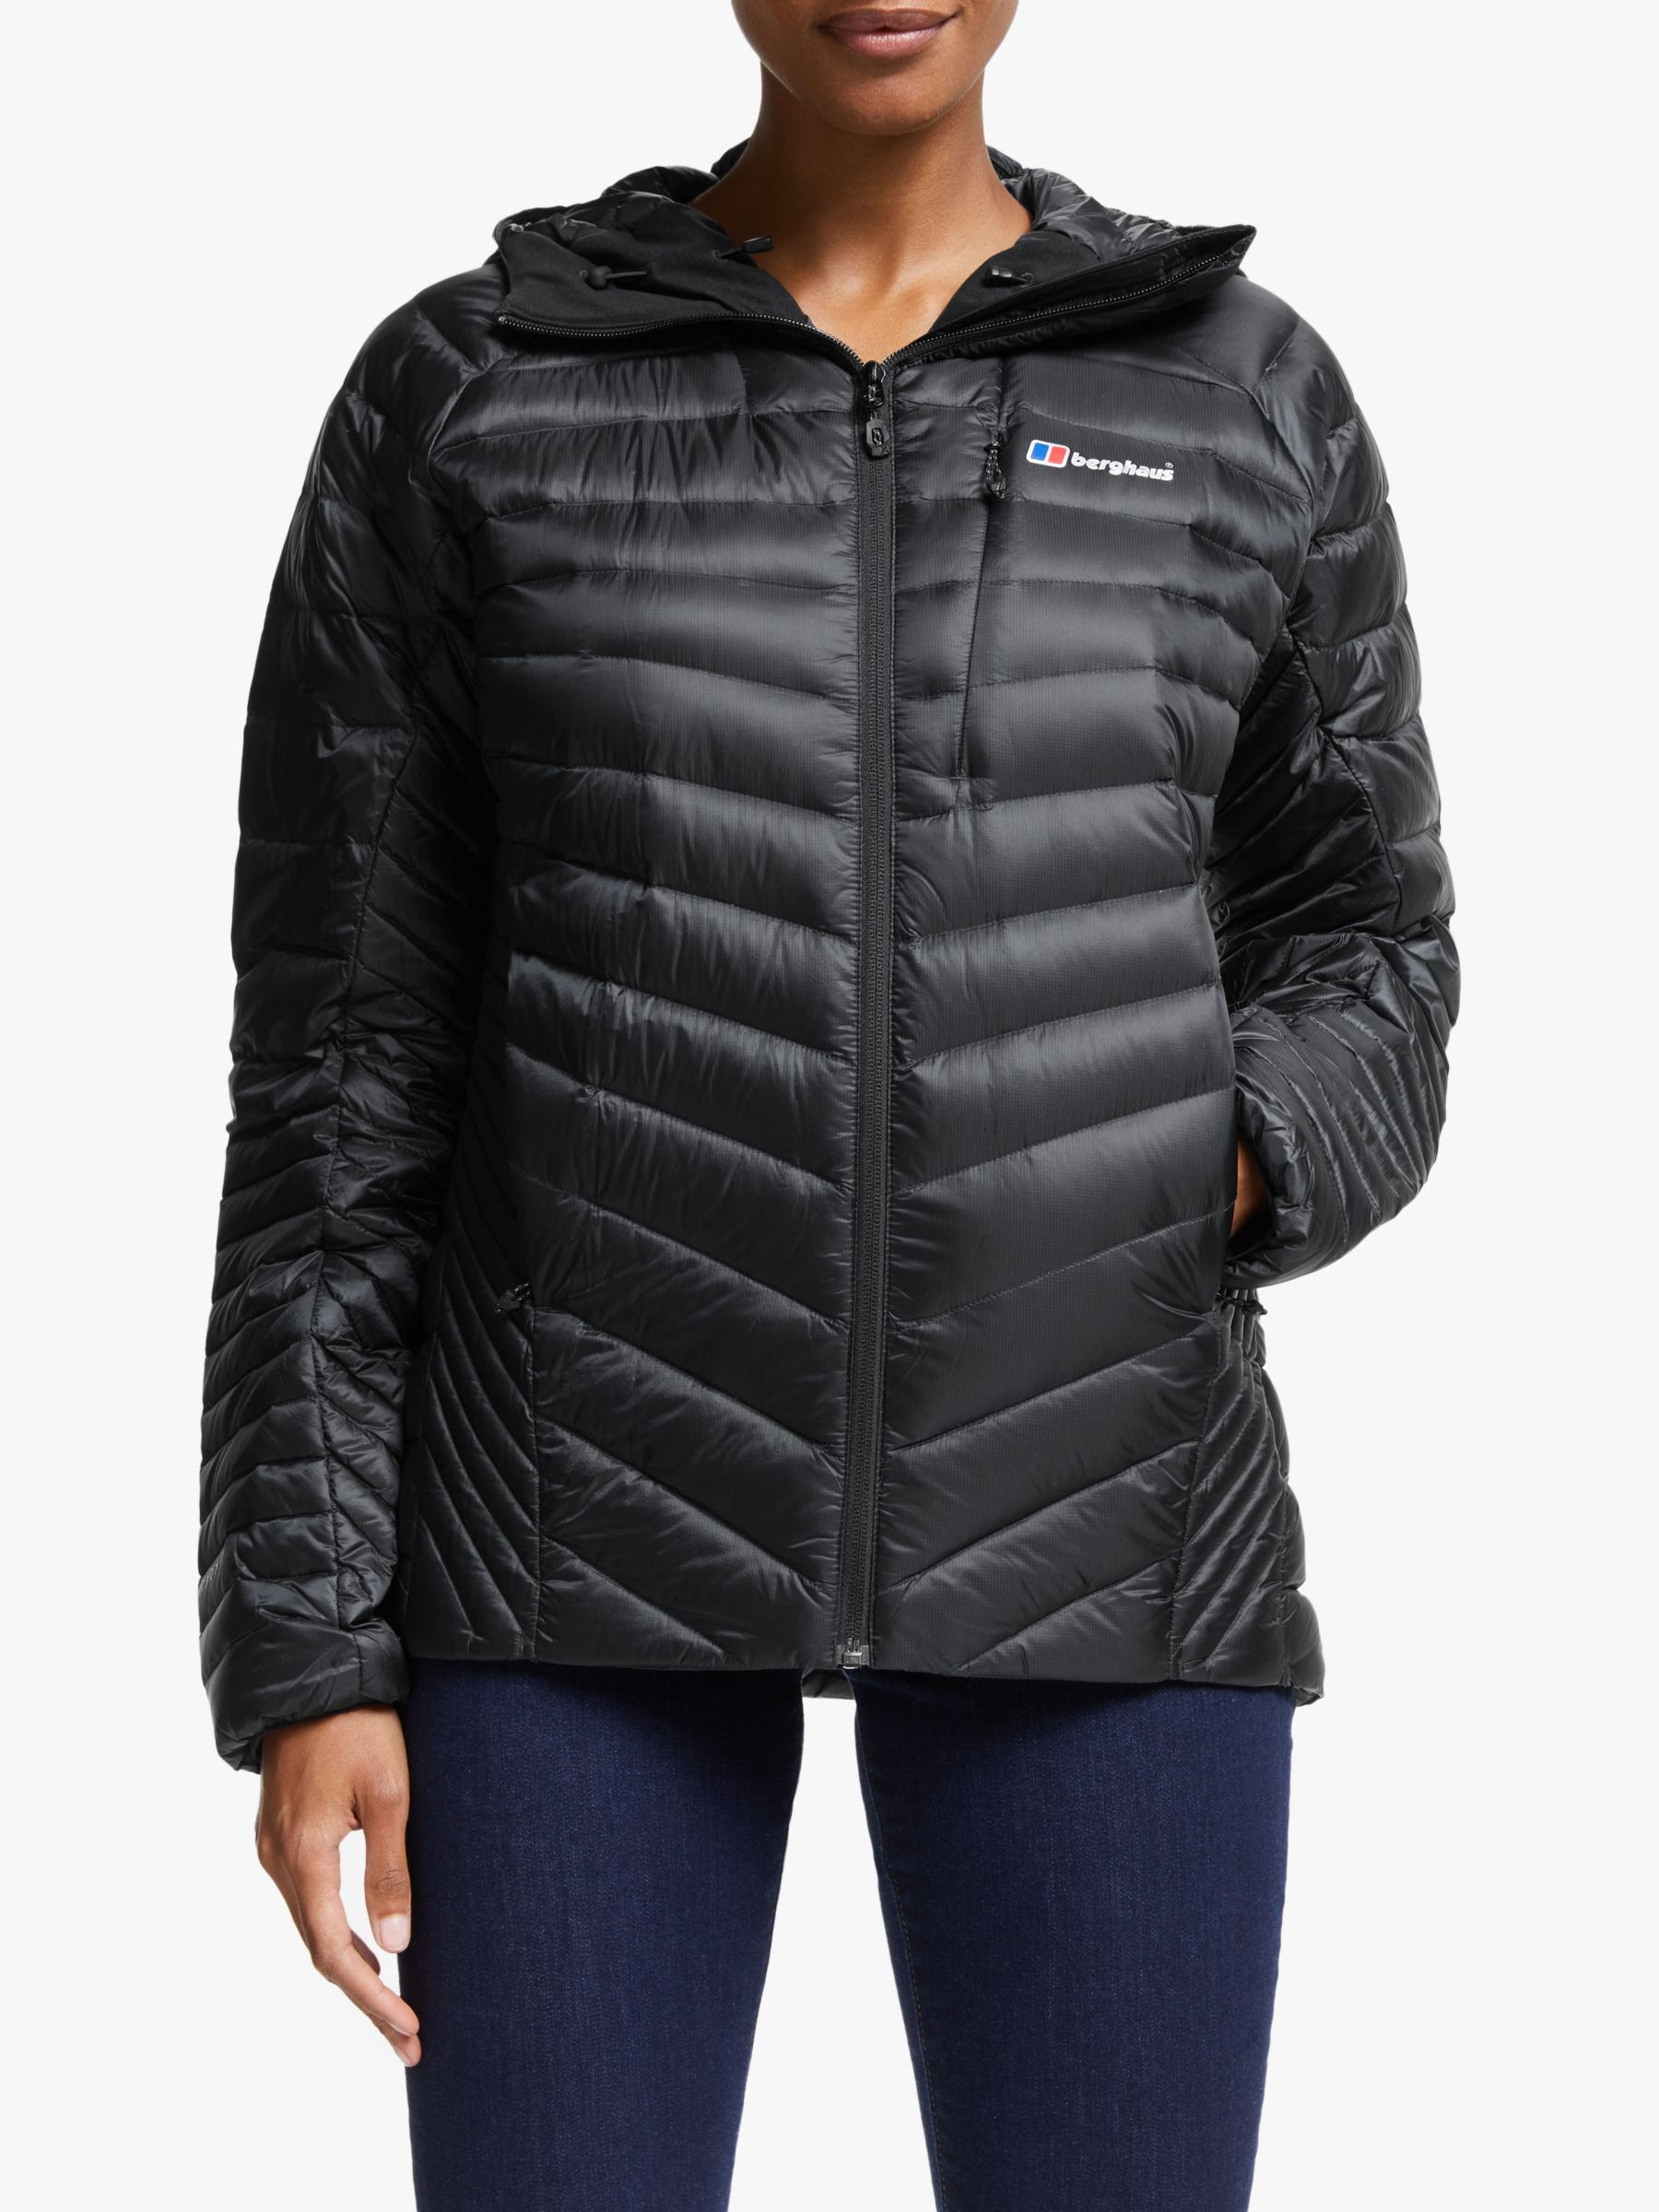 Berghaus Extrem Micro 2.0 Down Women's Insulated Jacket, Jet Black, 10